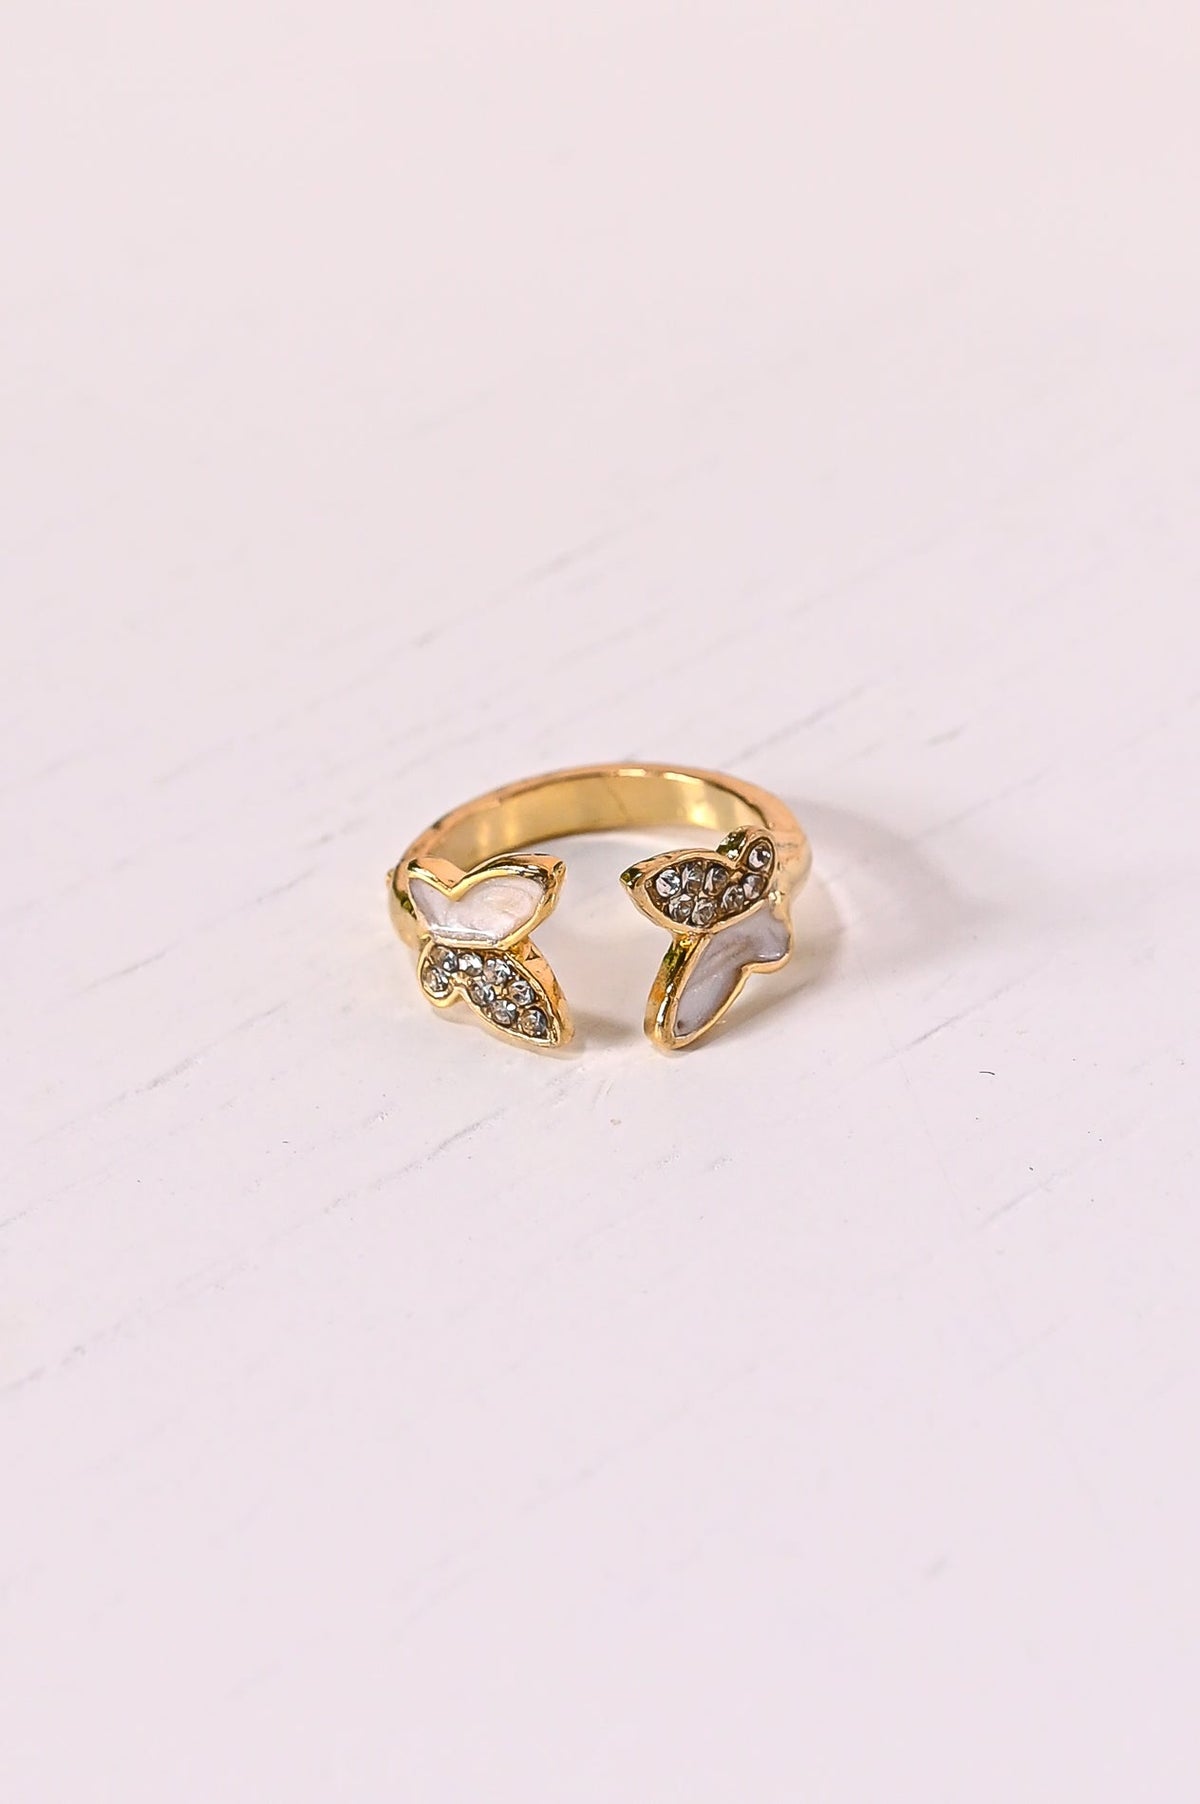 Gold/Bling 5-Piece Ring Set - RNG1101GO